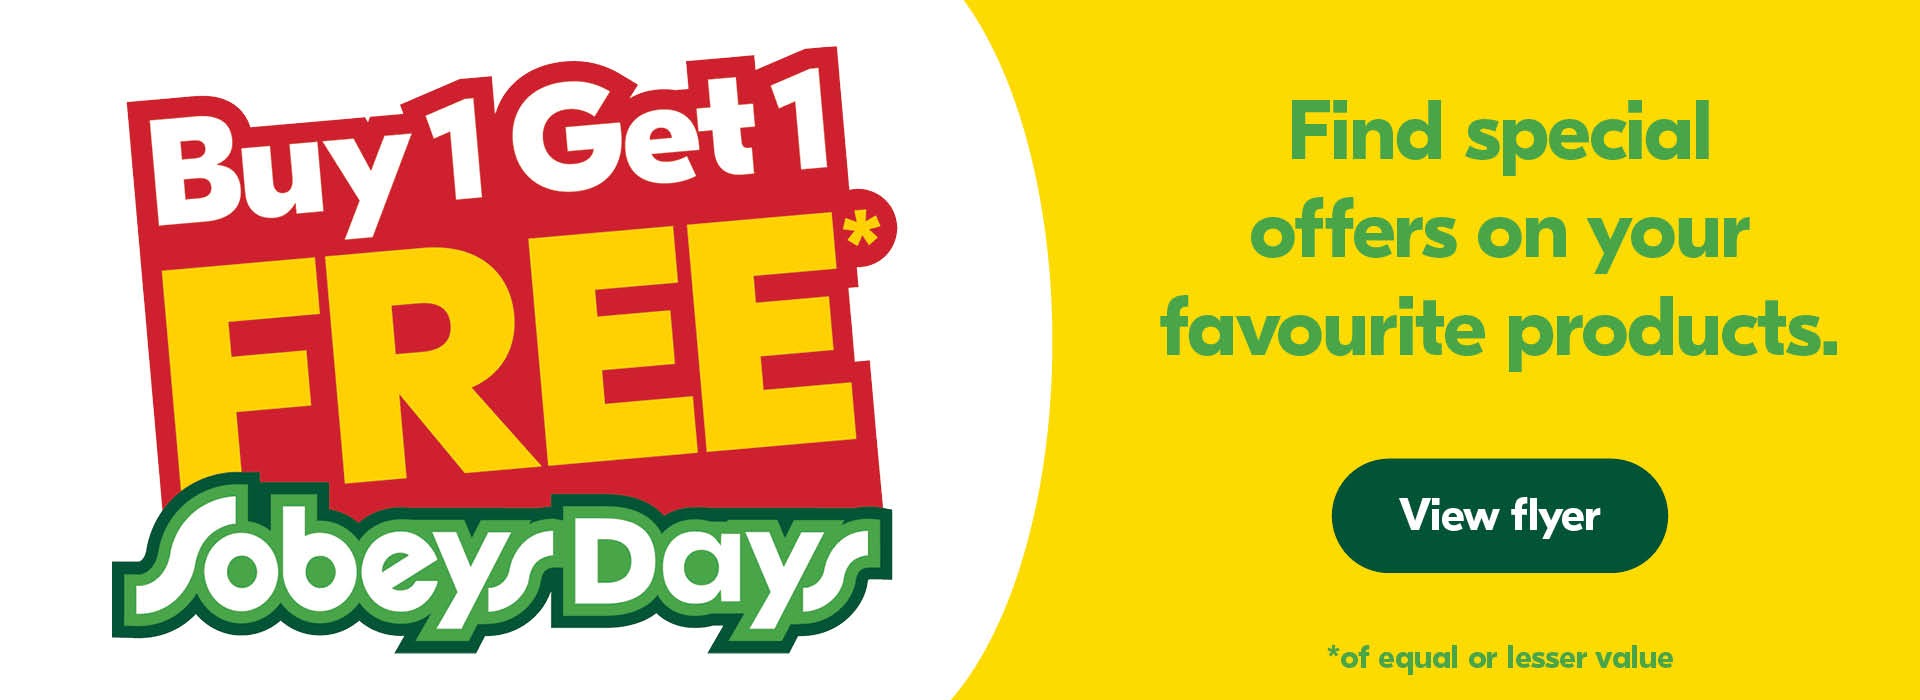 Text Reading 'Buy 1 Get 1 FREE, Sobeys Days. Find special offers on your favourite products. Click on 'View fyler' button for more information.'